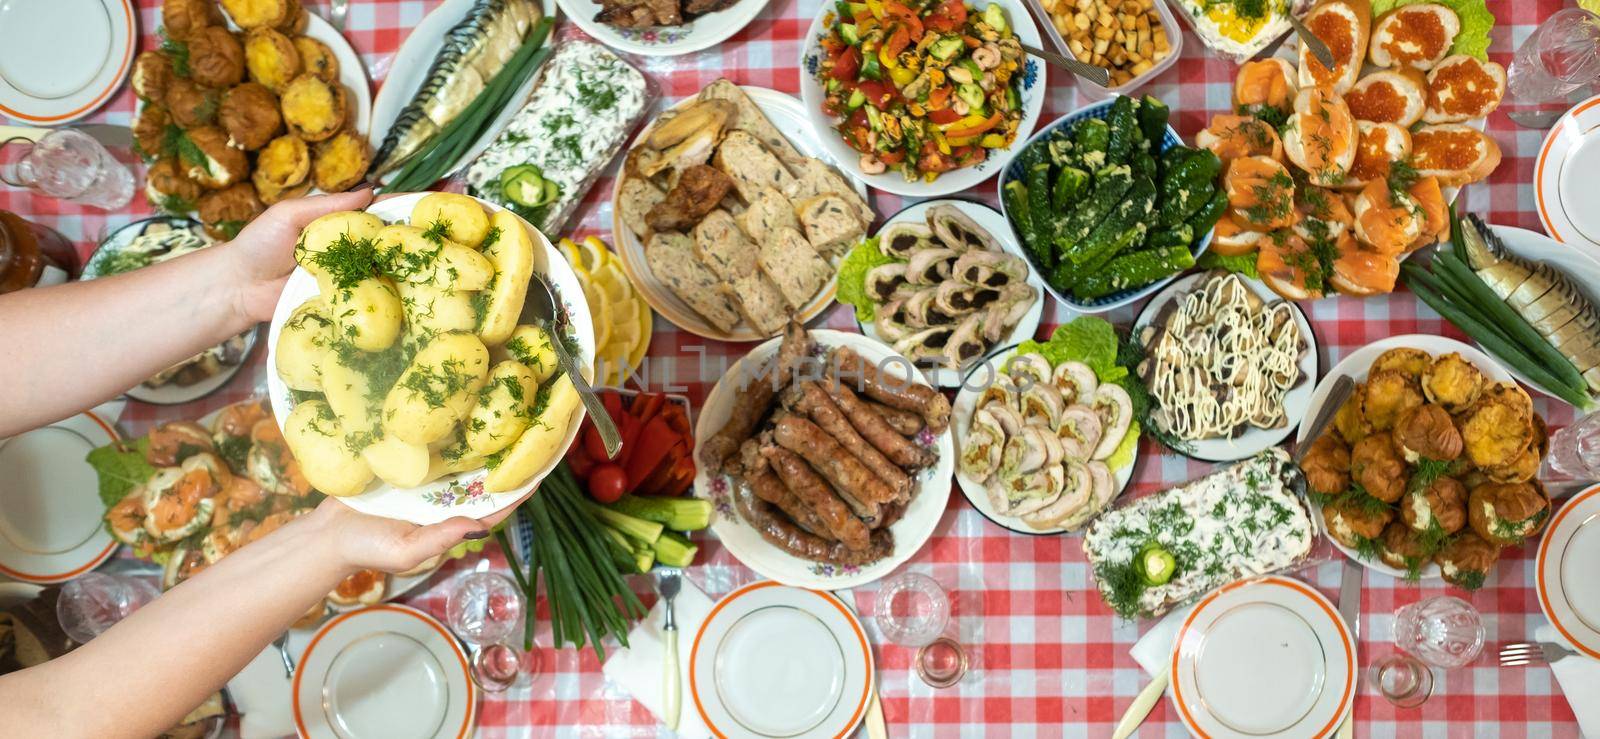 A lot of different food on the Banquet table and served boiled potatoes with dill.A large number of ready-made dishes on the table.Holiday at the table by Lobachad